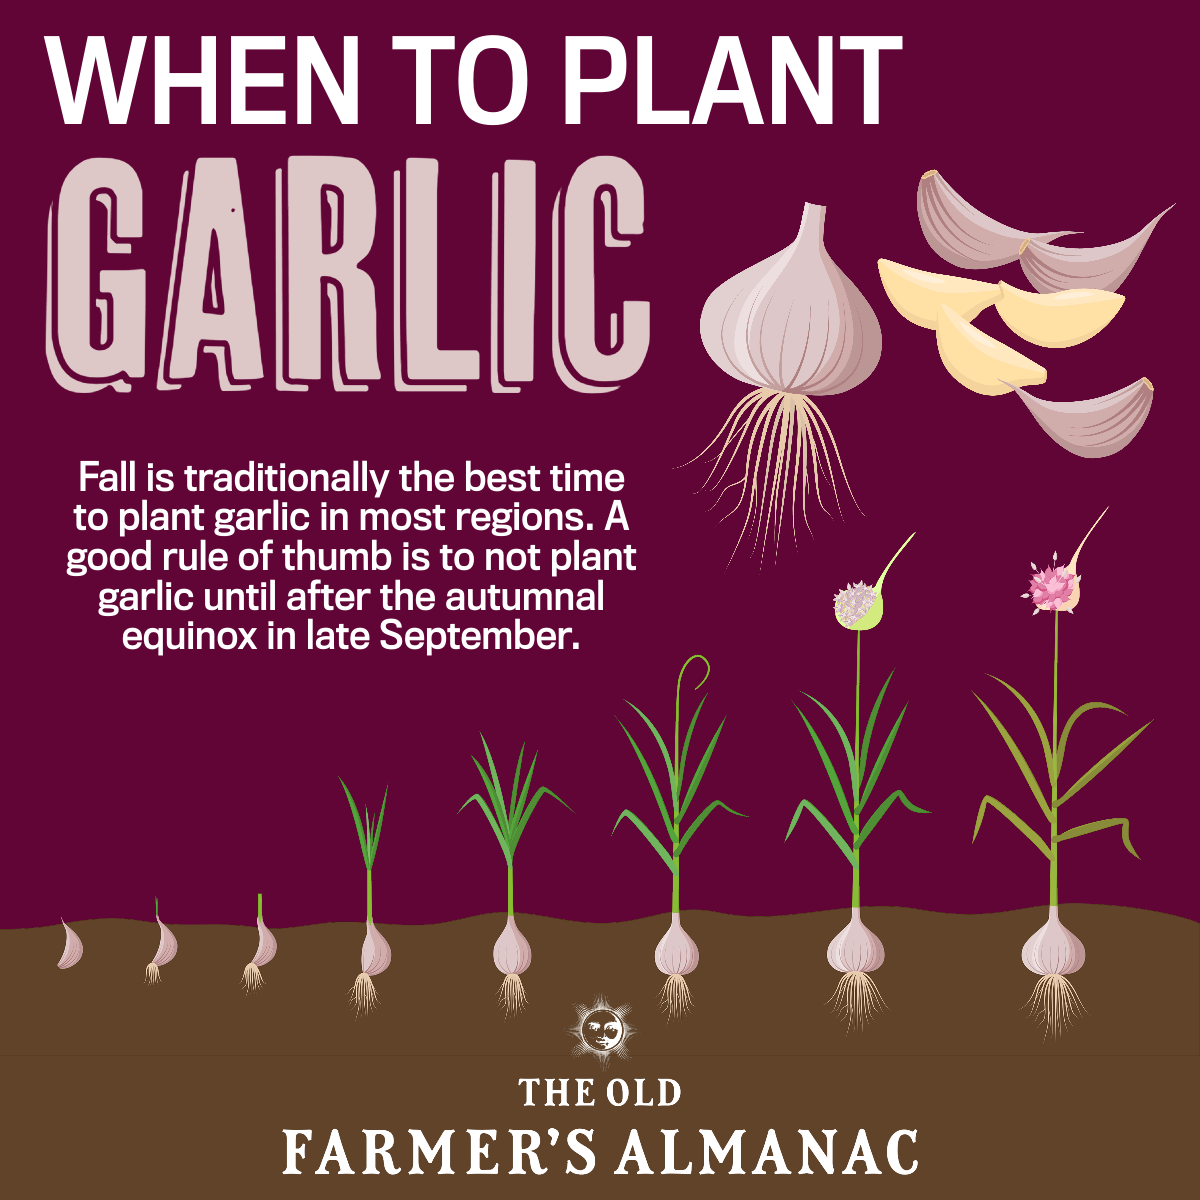 Fall is traditionally the best time to plant garlic in most regions. A good rule of thumb is to not plant garlic until after the autumnal equinox in late September.